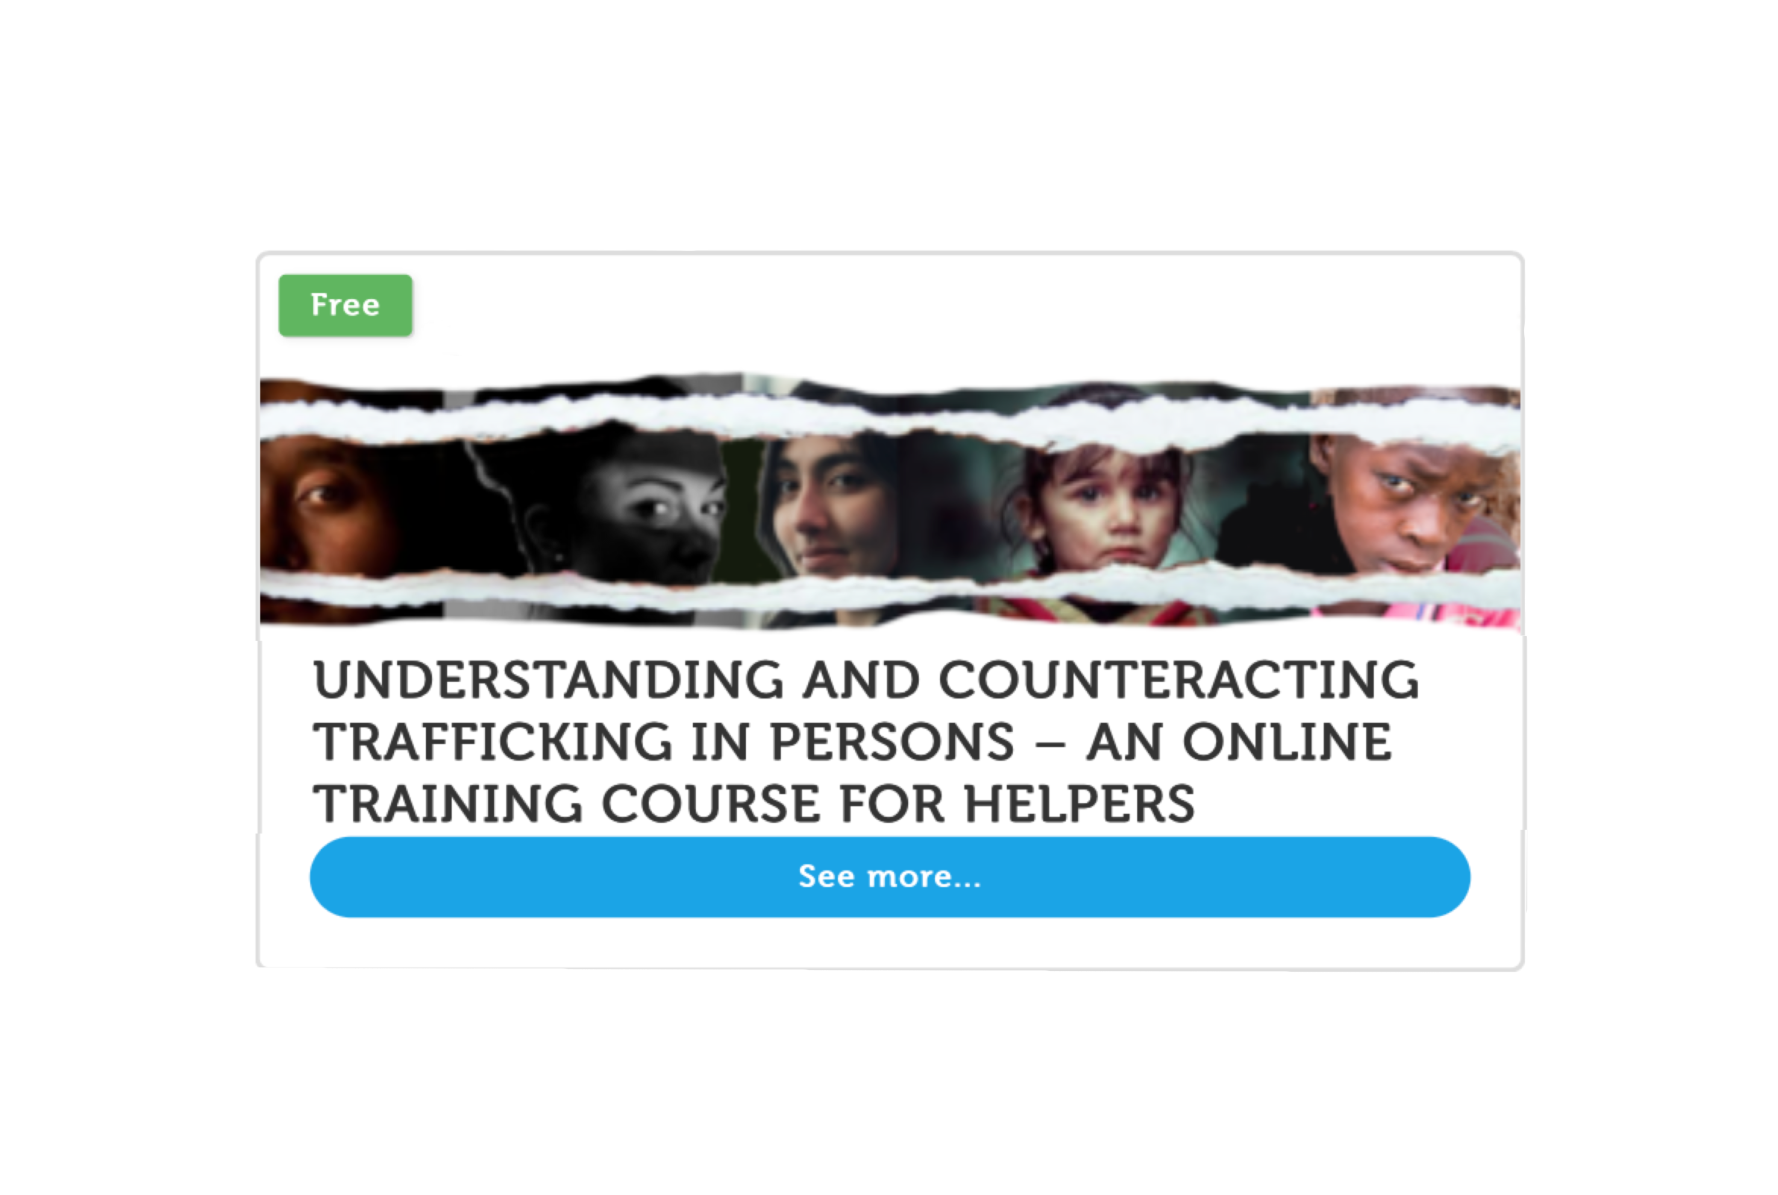 Our free online course – Understanding and counteracting trafficking in persons in English, French, Spanish, German and Italian